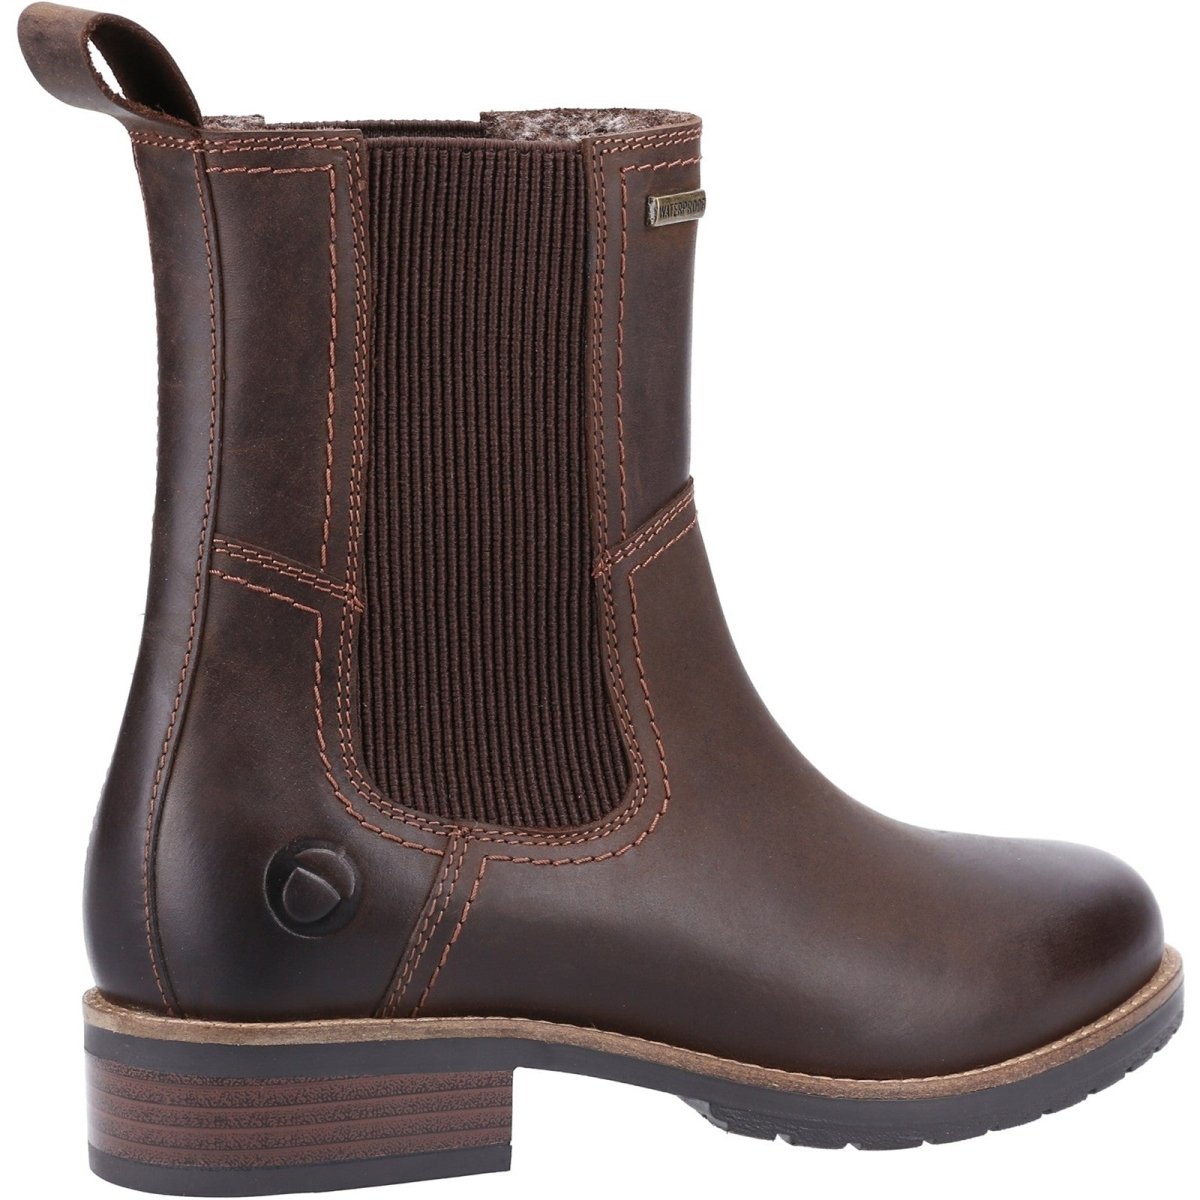 Cotswold Somerford Waterproof Ladies Ankle Chelsea Boots - Shoe Store Direct